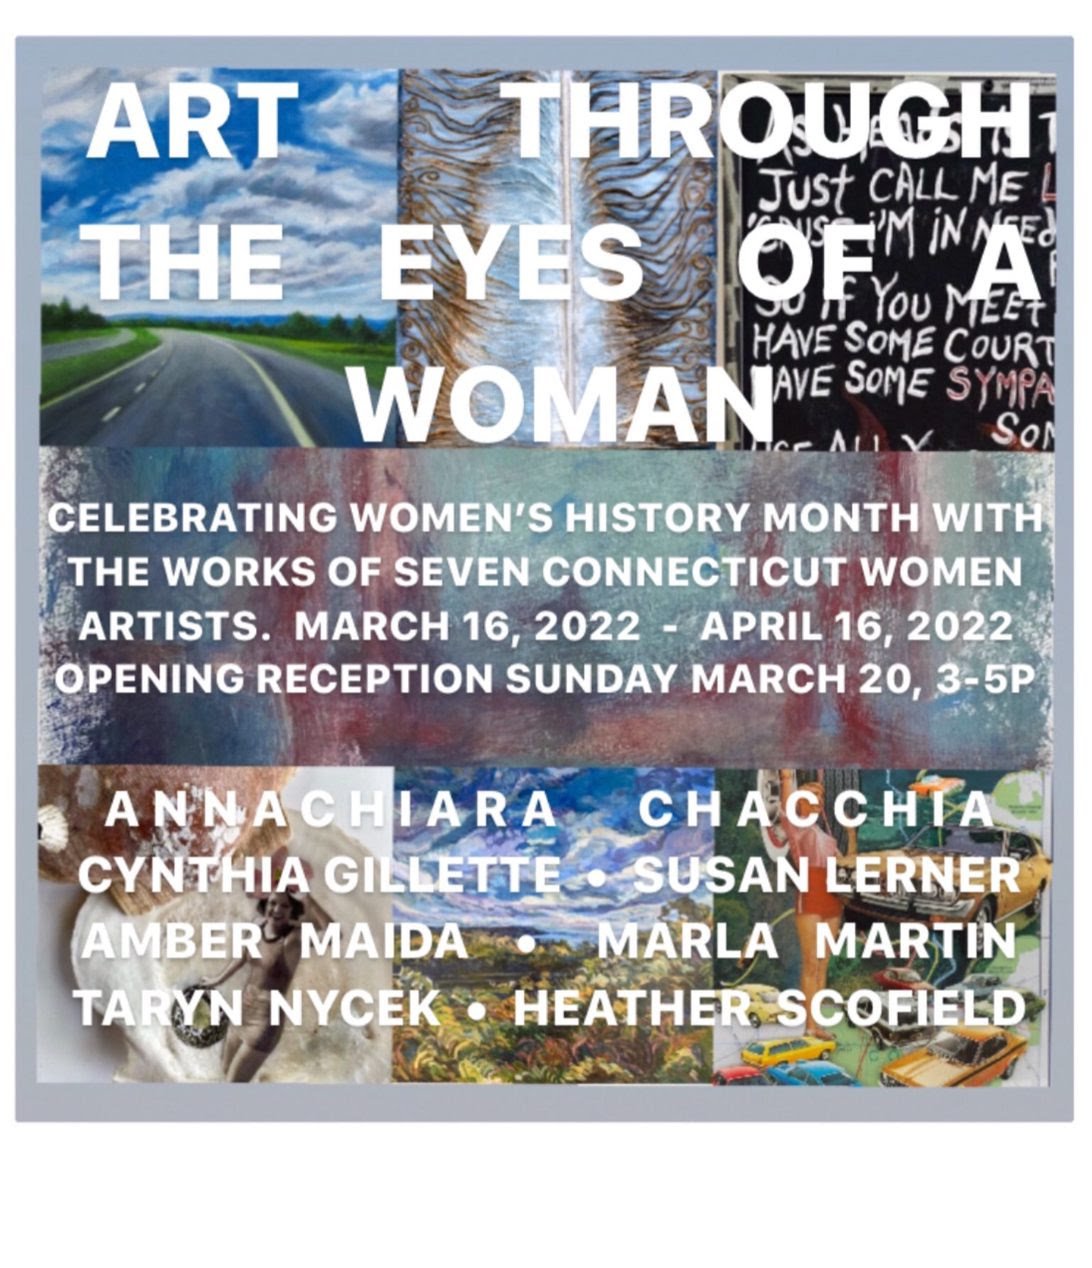 2022 Art Through the Eyes of a Woman:  Studio Hill Gallery,  Woodbury, CT